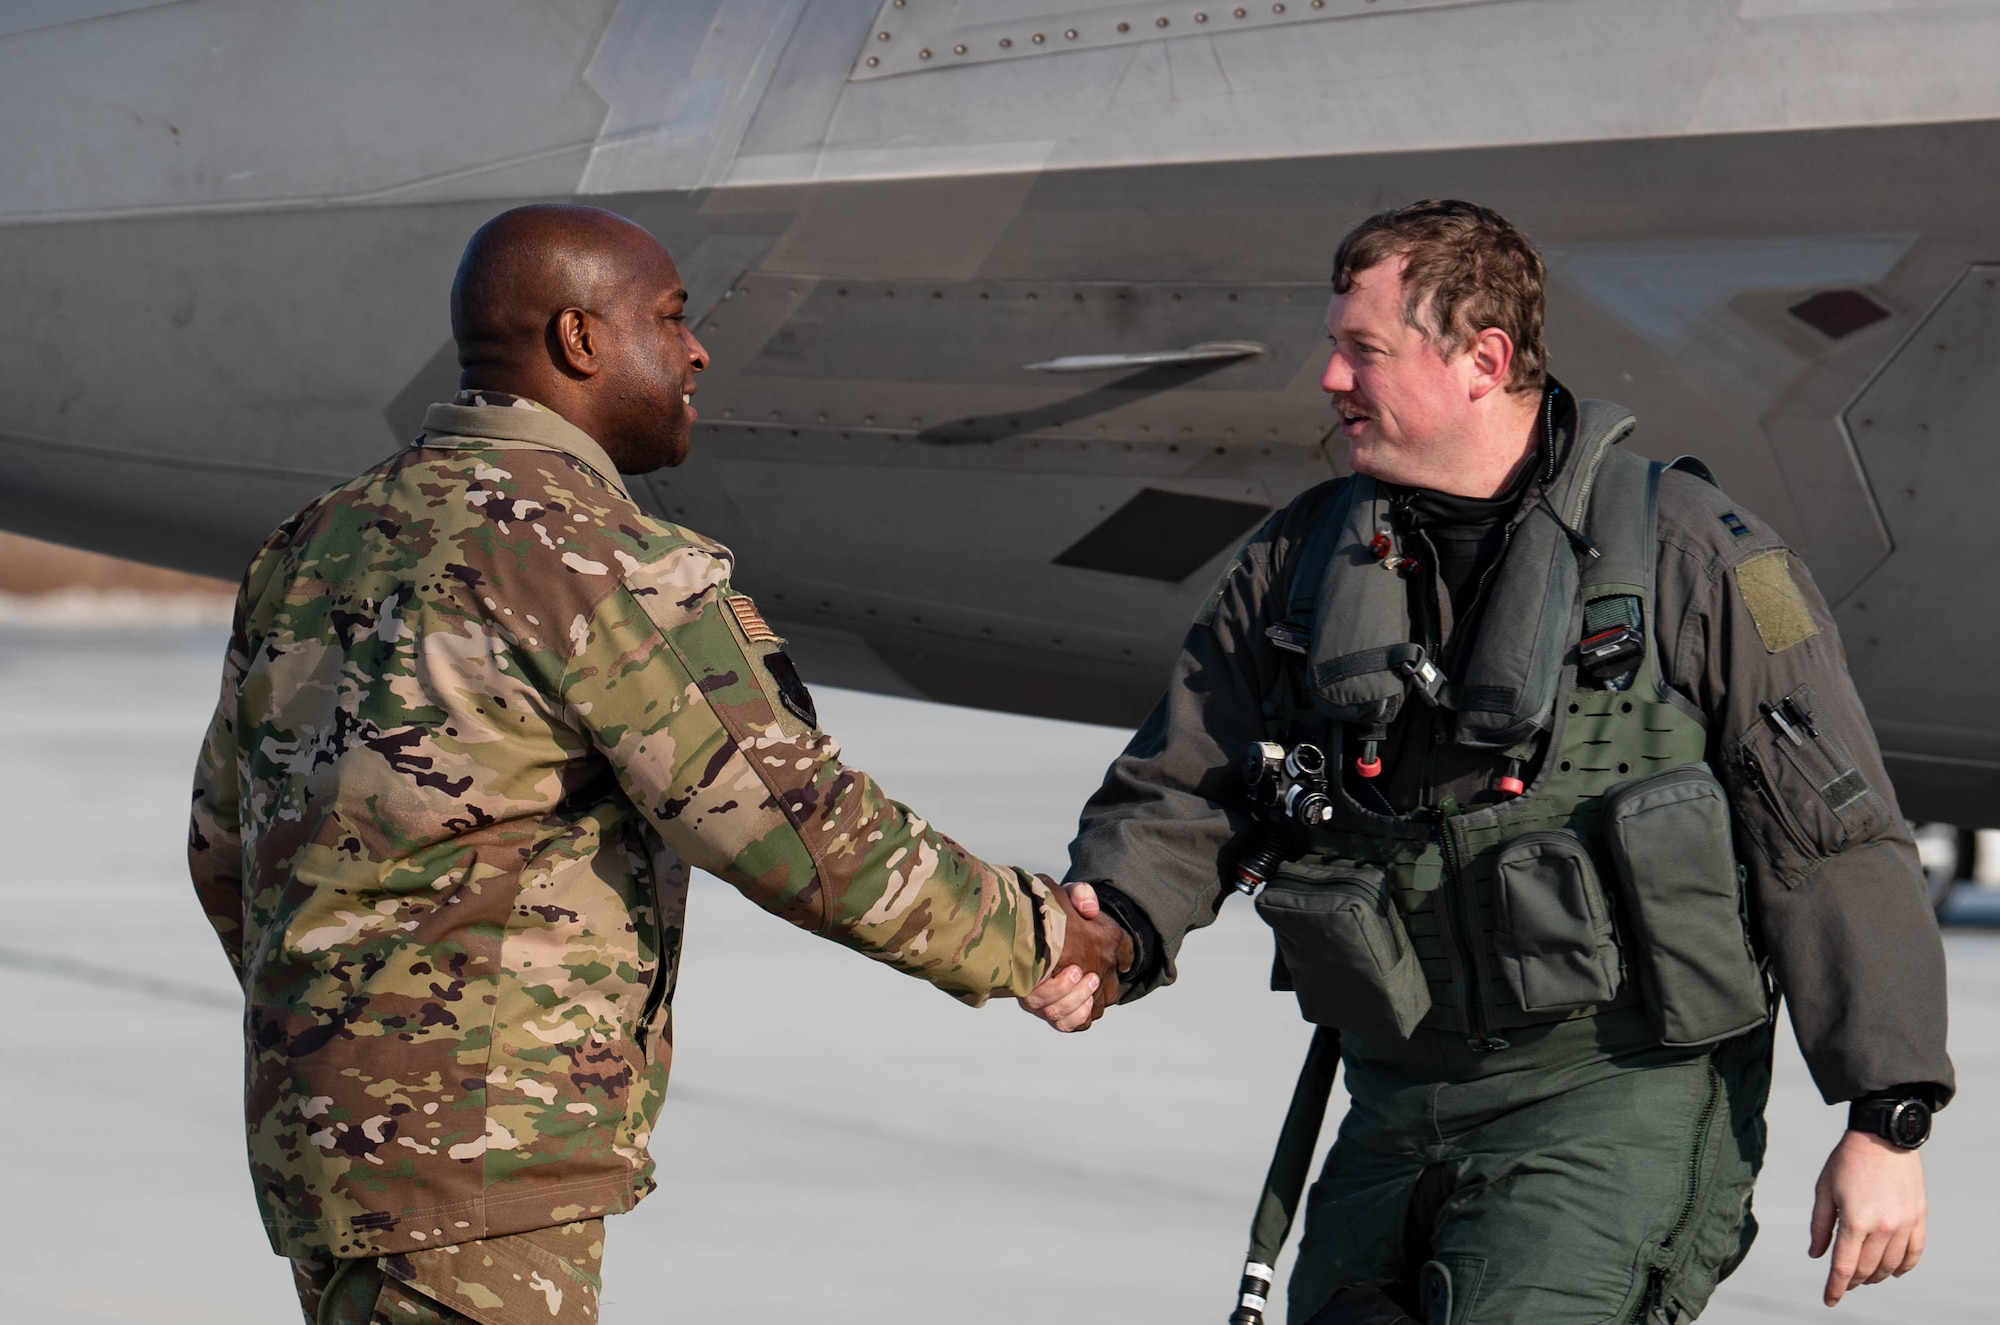 Airmen greet each other with a handshake.